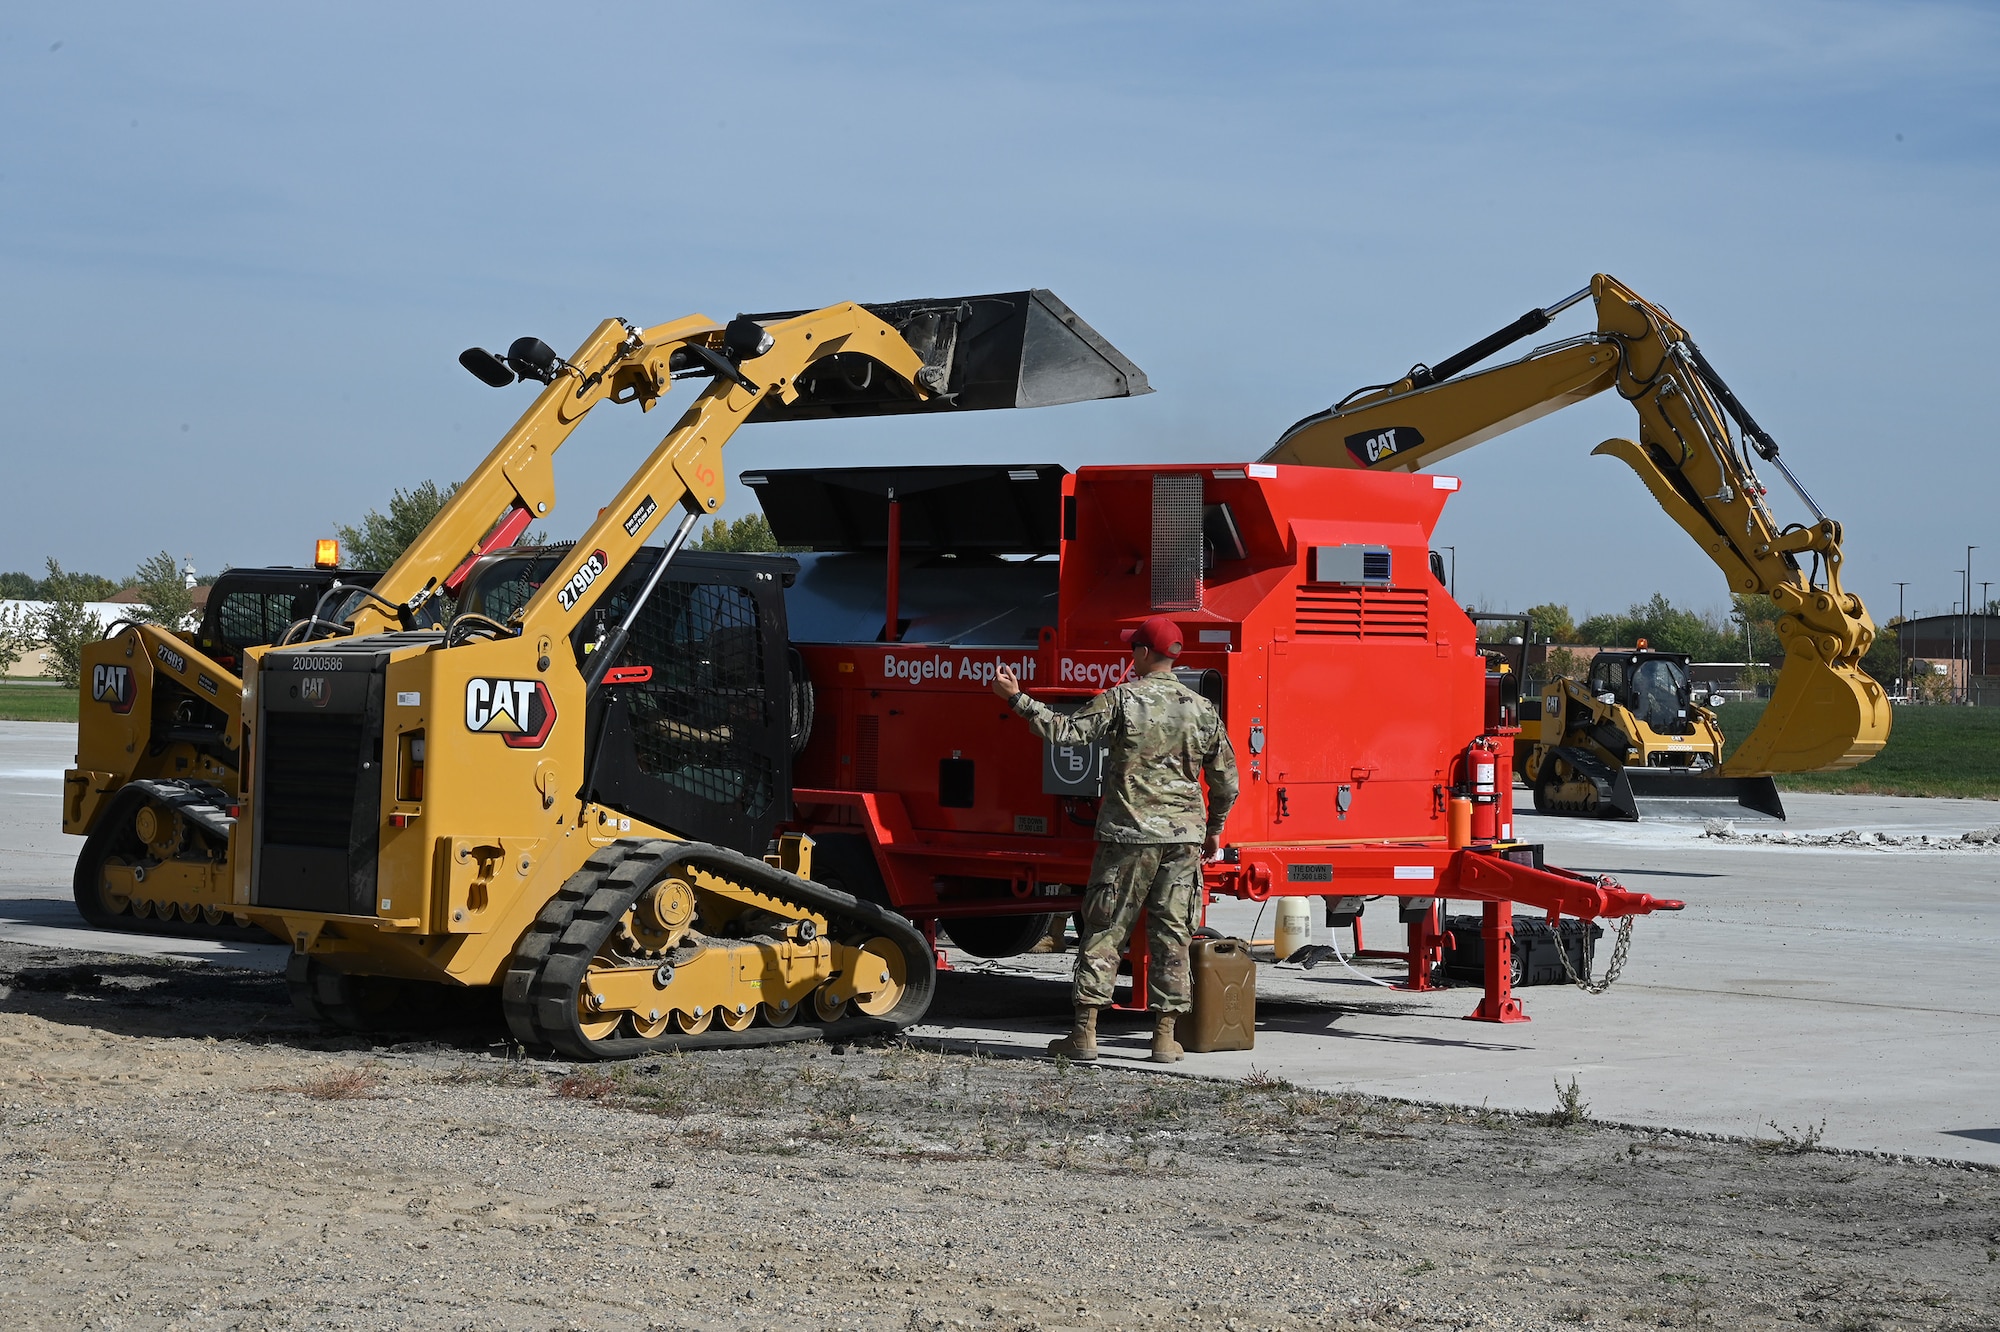 A military member directs a skid steer operator as he loads asphalt material into a large machine called an asphalt recycler to be reformed into patching material used to patch holes on a large concrete training runway at the North Dakota Air National Guard Regional Training Site, Fargo, N.D., Sept. 29, 2021.